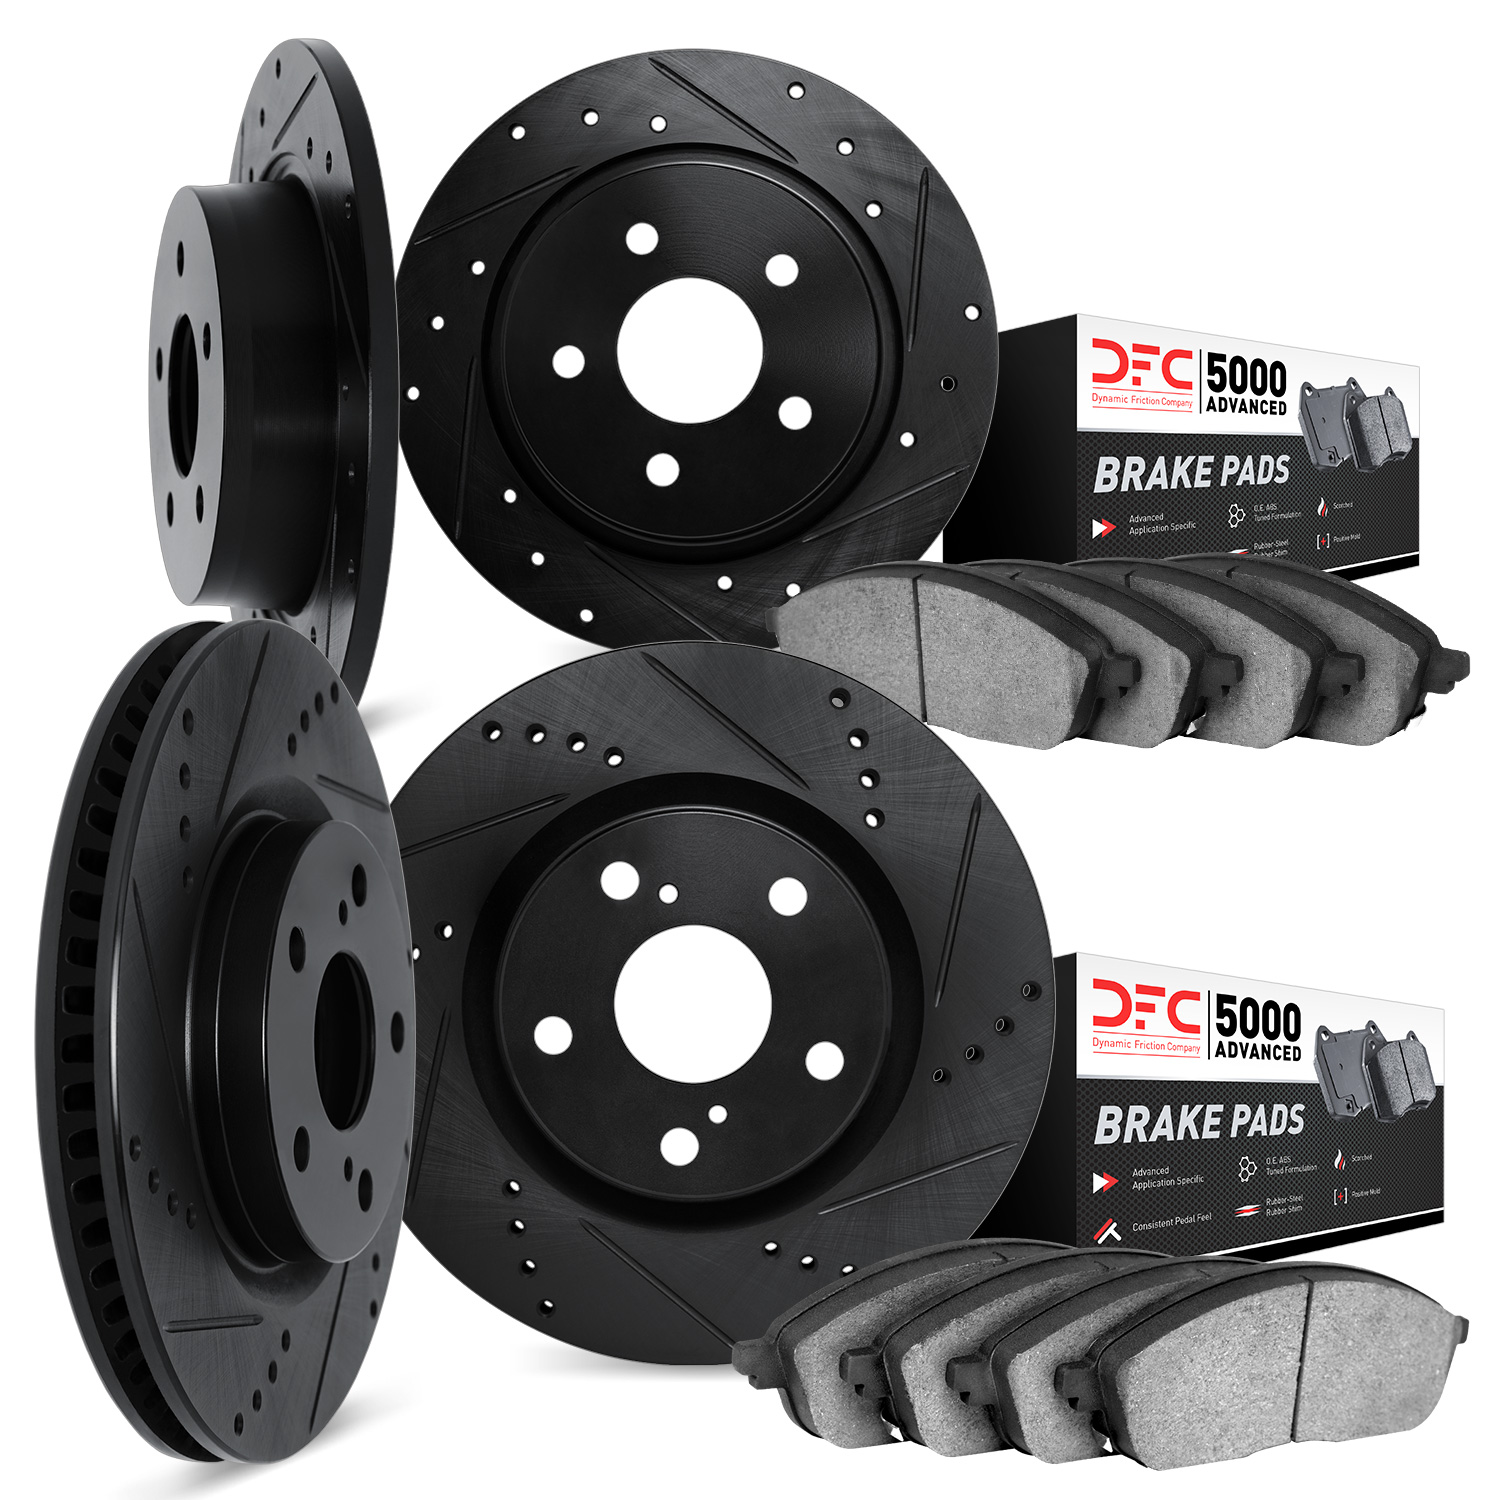 8504-67098 Drilled/Slotted Brake Rotors w/5000 Advanced Brake Pads Kit [Black], 2005-2008 Infiniti/Nissan, Position: Front and R